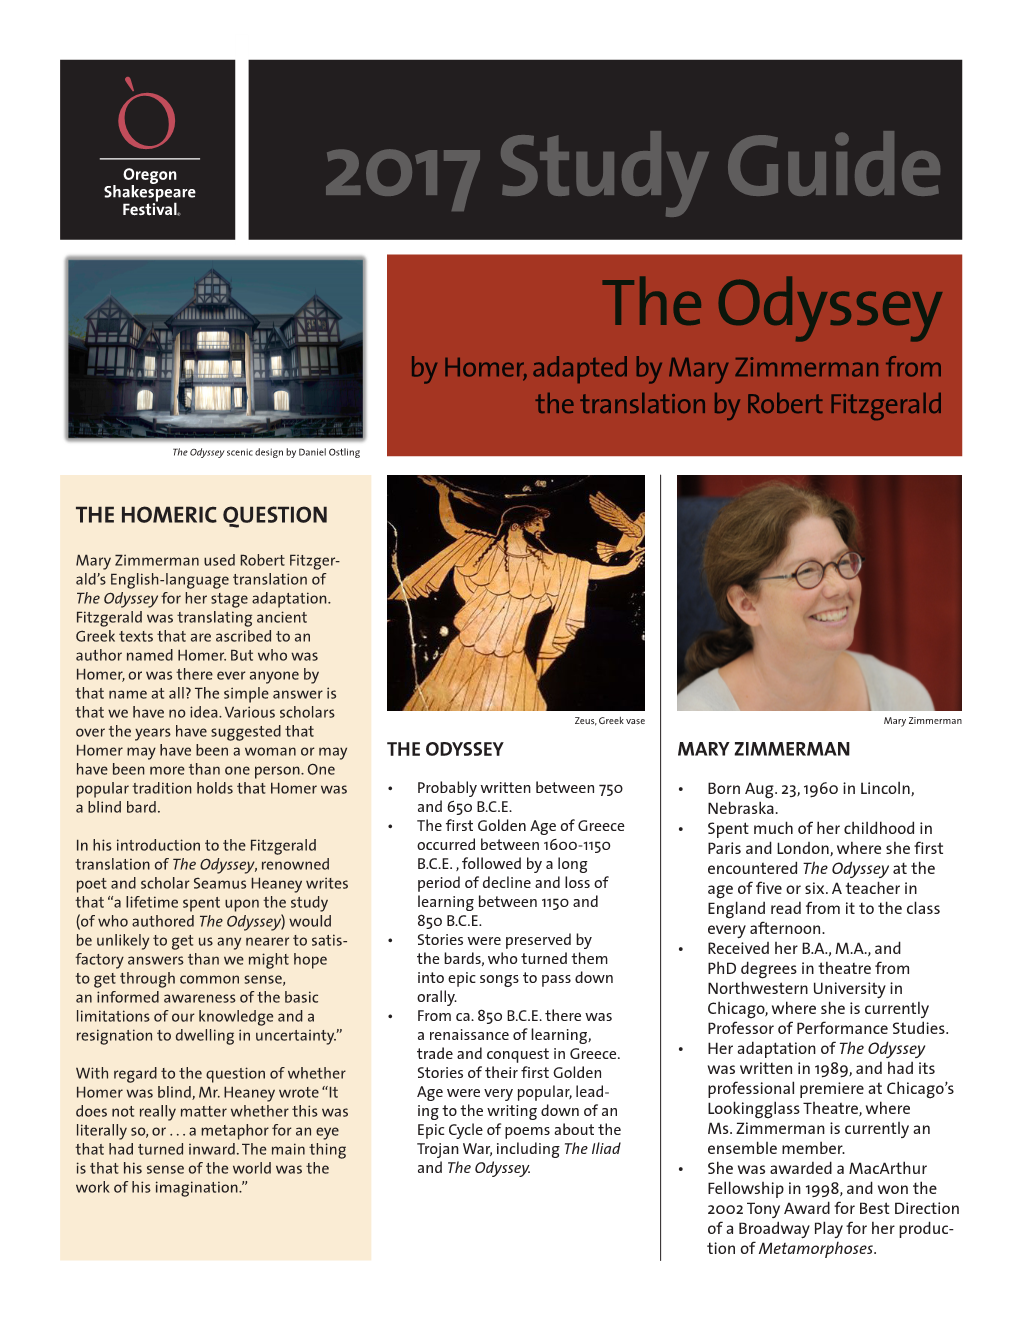 2017 Study Guide the Odyssey by Homer, Adapted by Mary Zimmerman from the Translation by Robert Fitzgerald